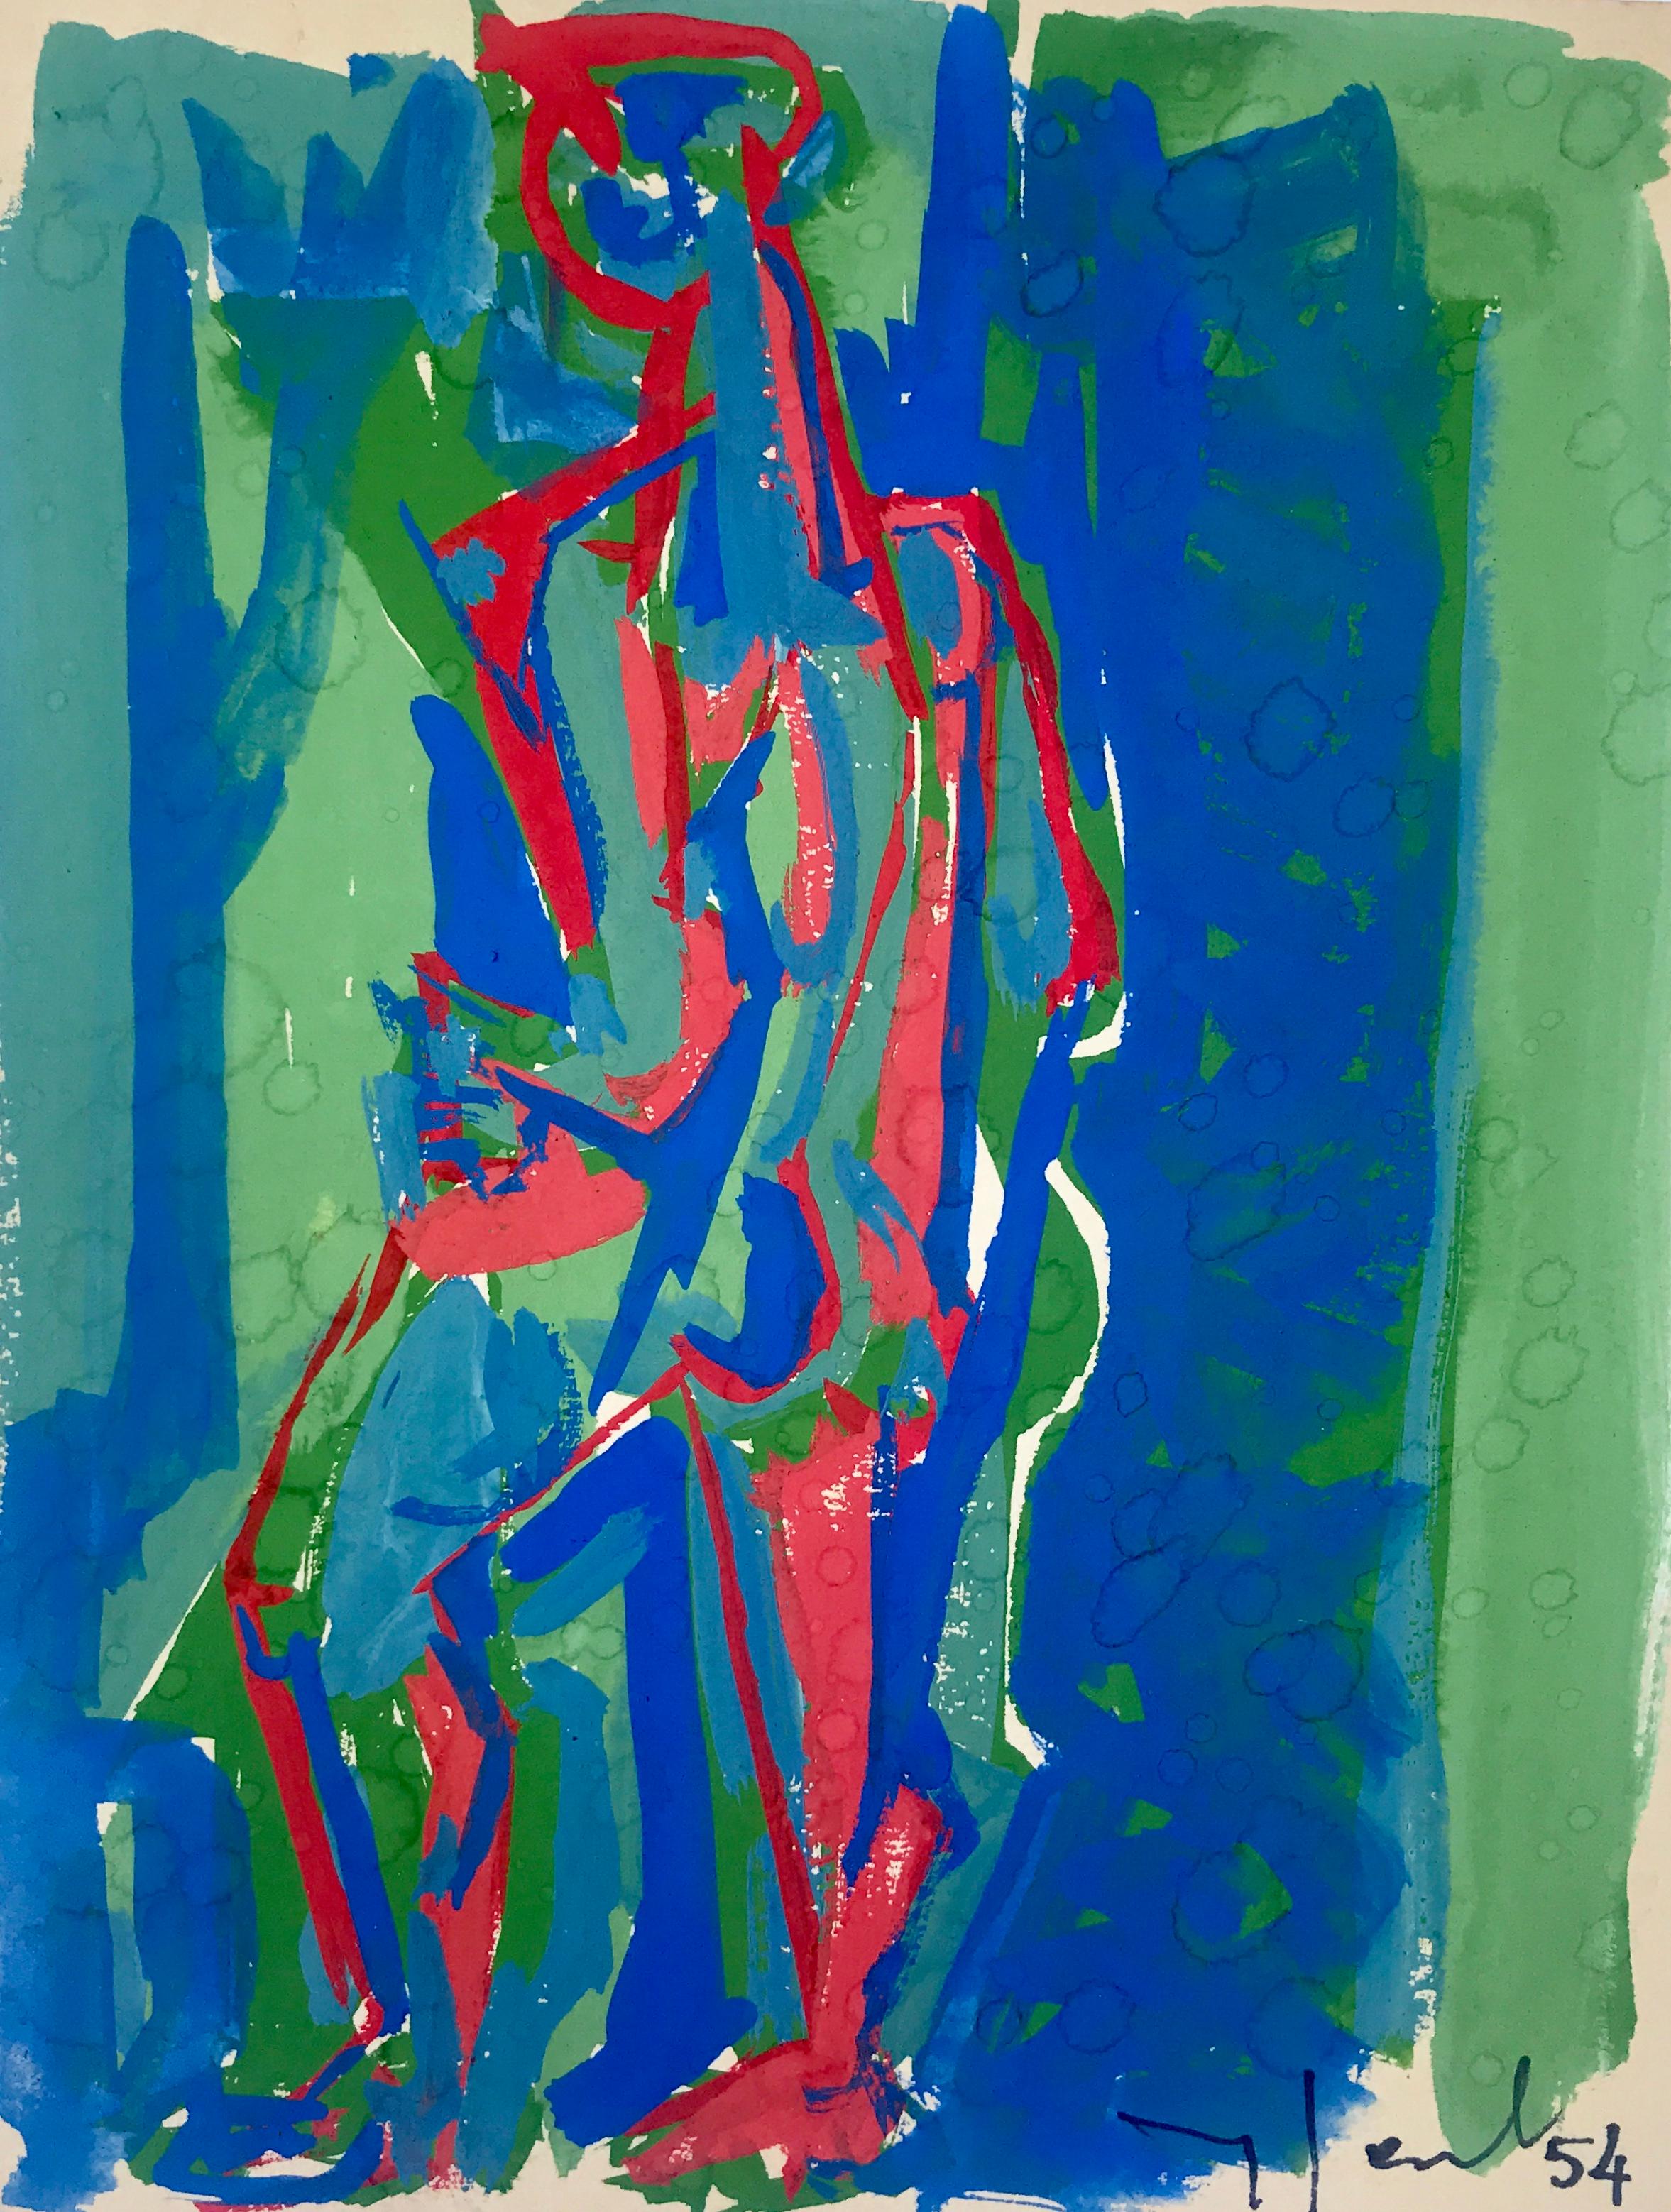 'Green and Blue' s an original gouache on paper drawing created by French artist Yves Jobert in 1954. Featuring a palette made of red, blue and green, this vertical format depicts a silhouette shown in profile. Red and blue strokes create the